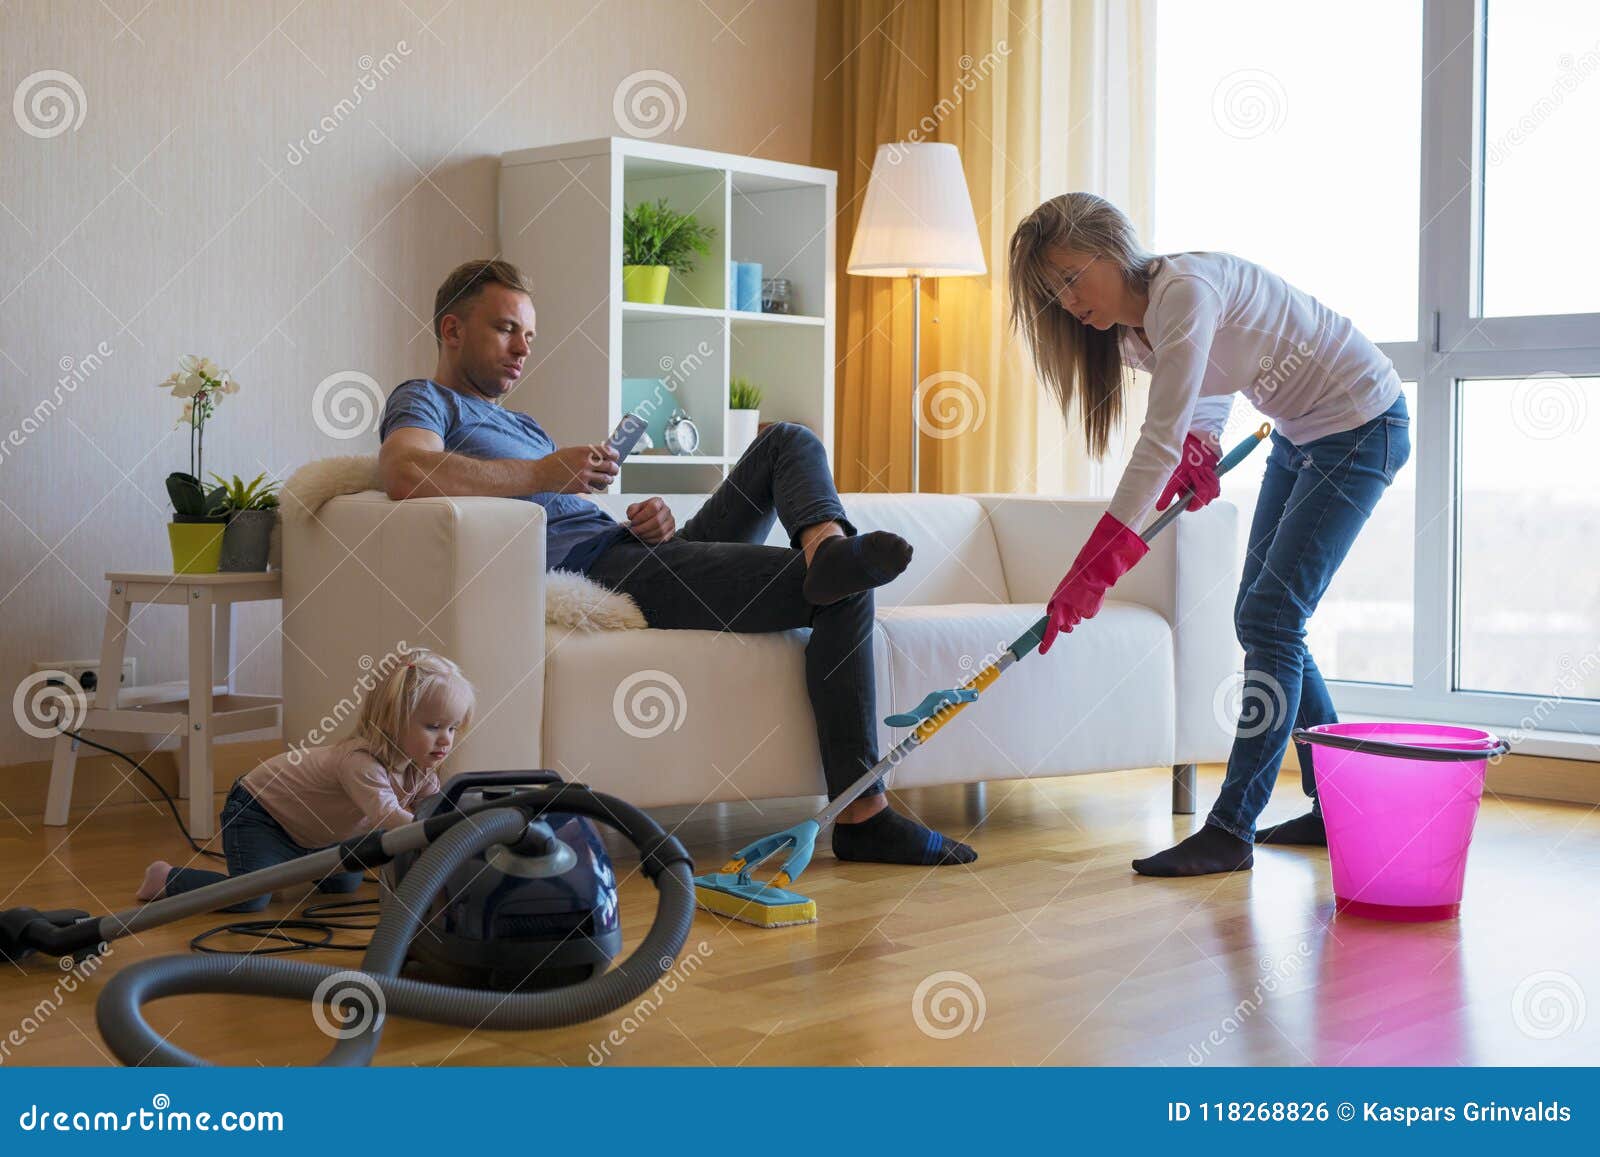 woman cleaning floors at home while her lazy man sitting in couch